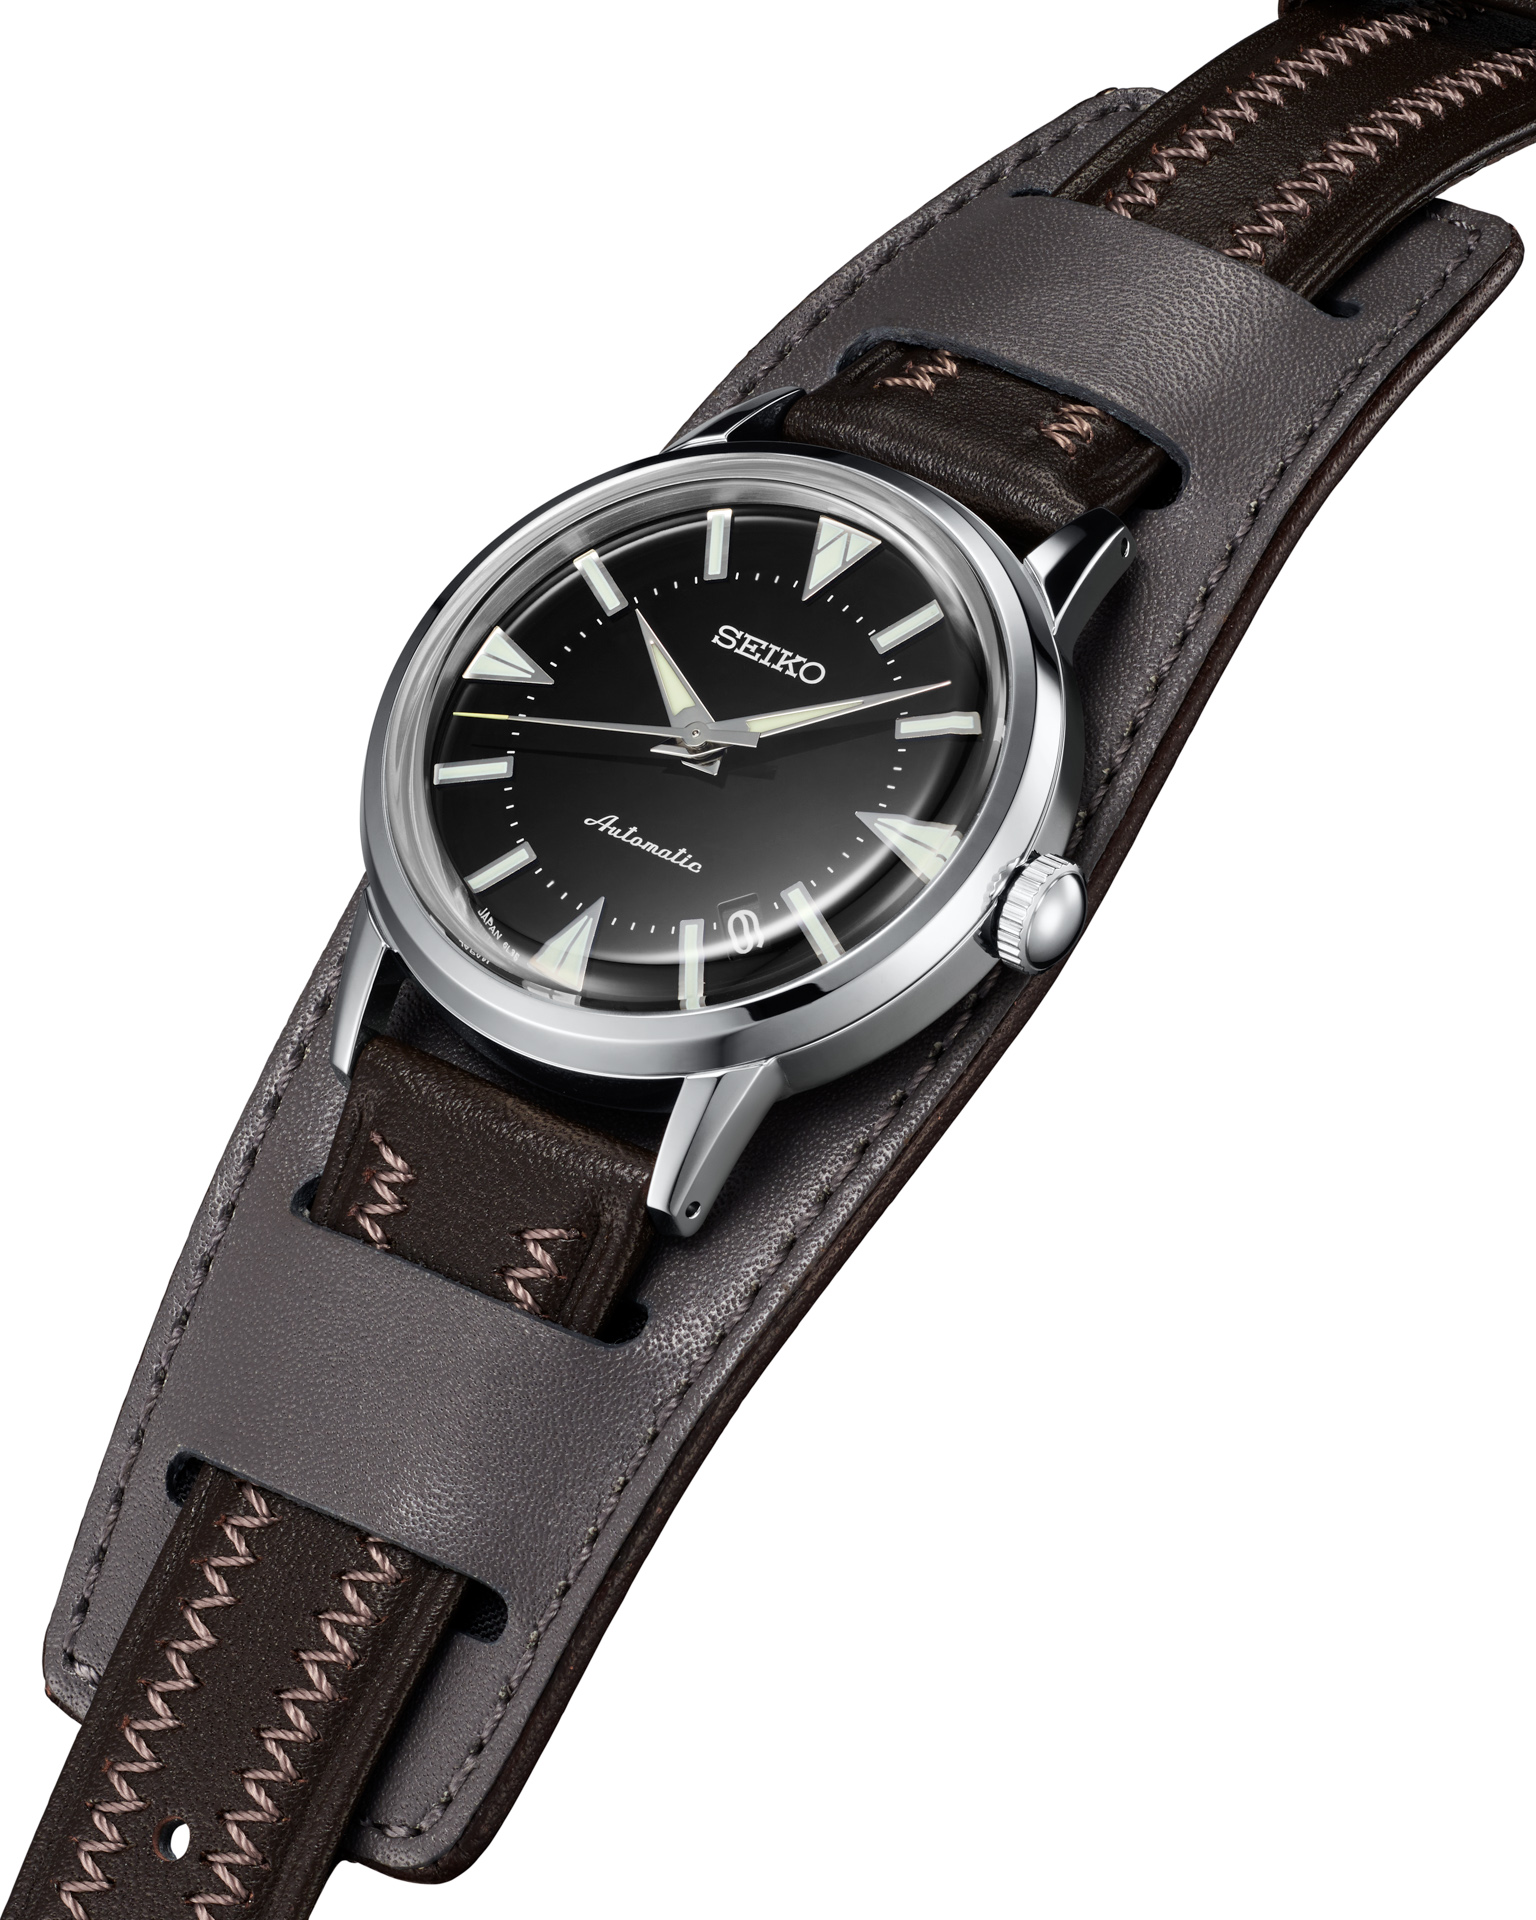 Seiko Brings Back The Laurel With Four New Alpinist Watches | aBlogtoWatch